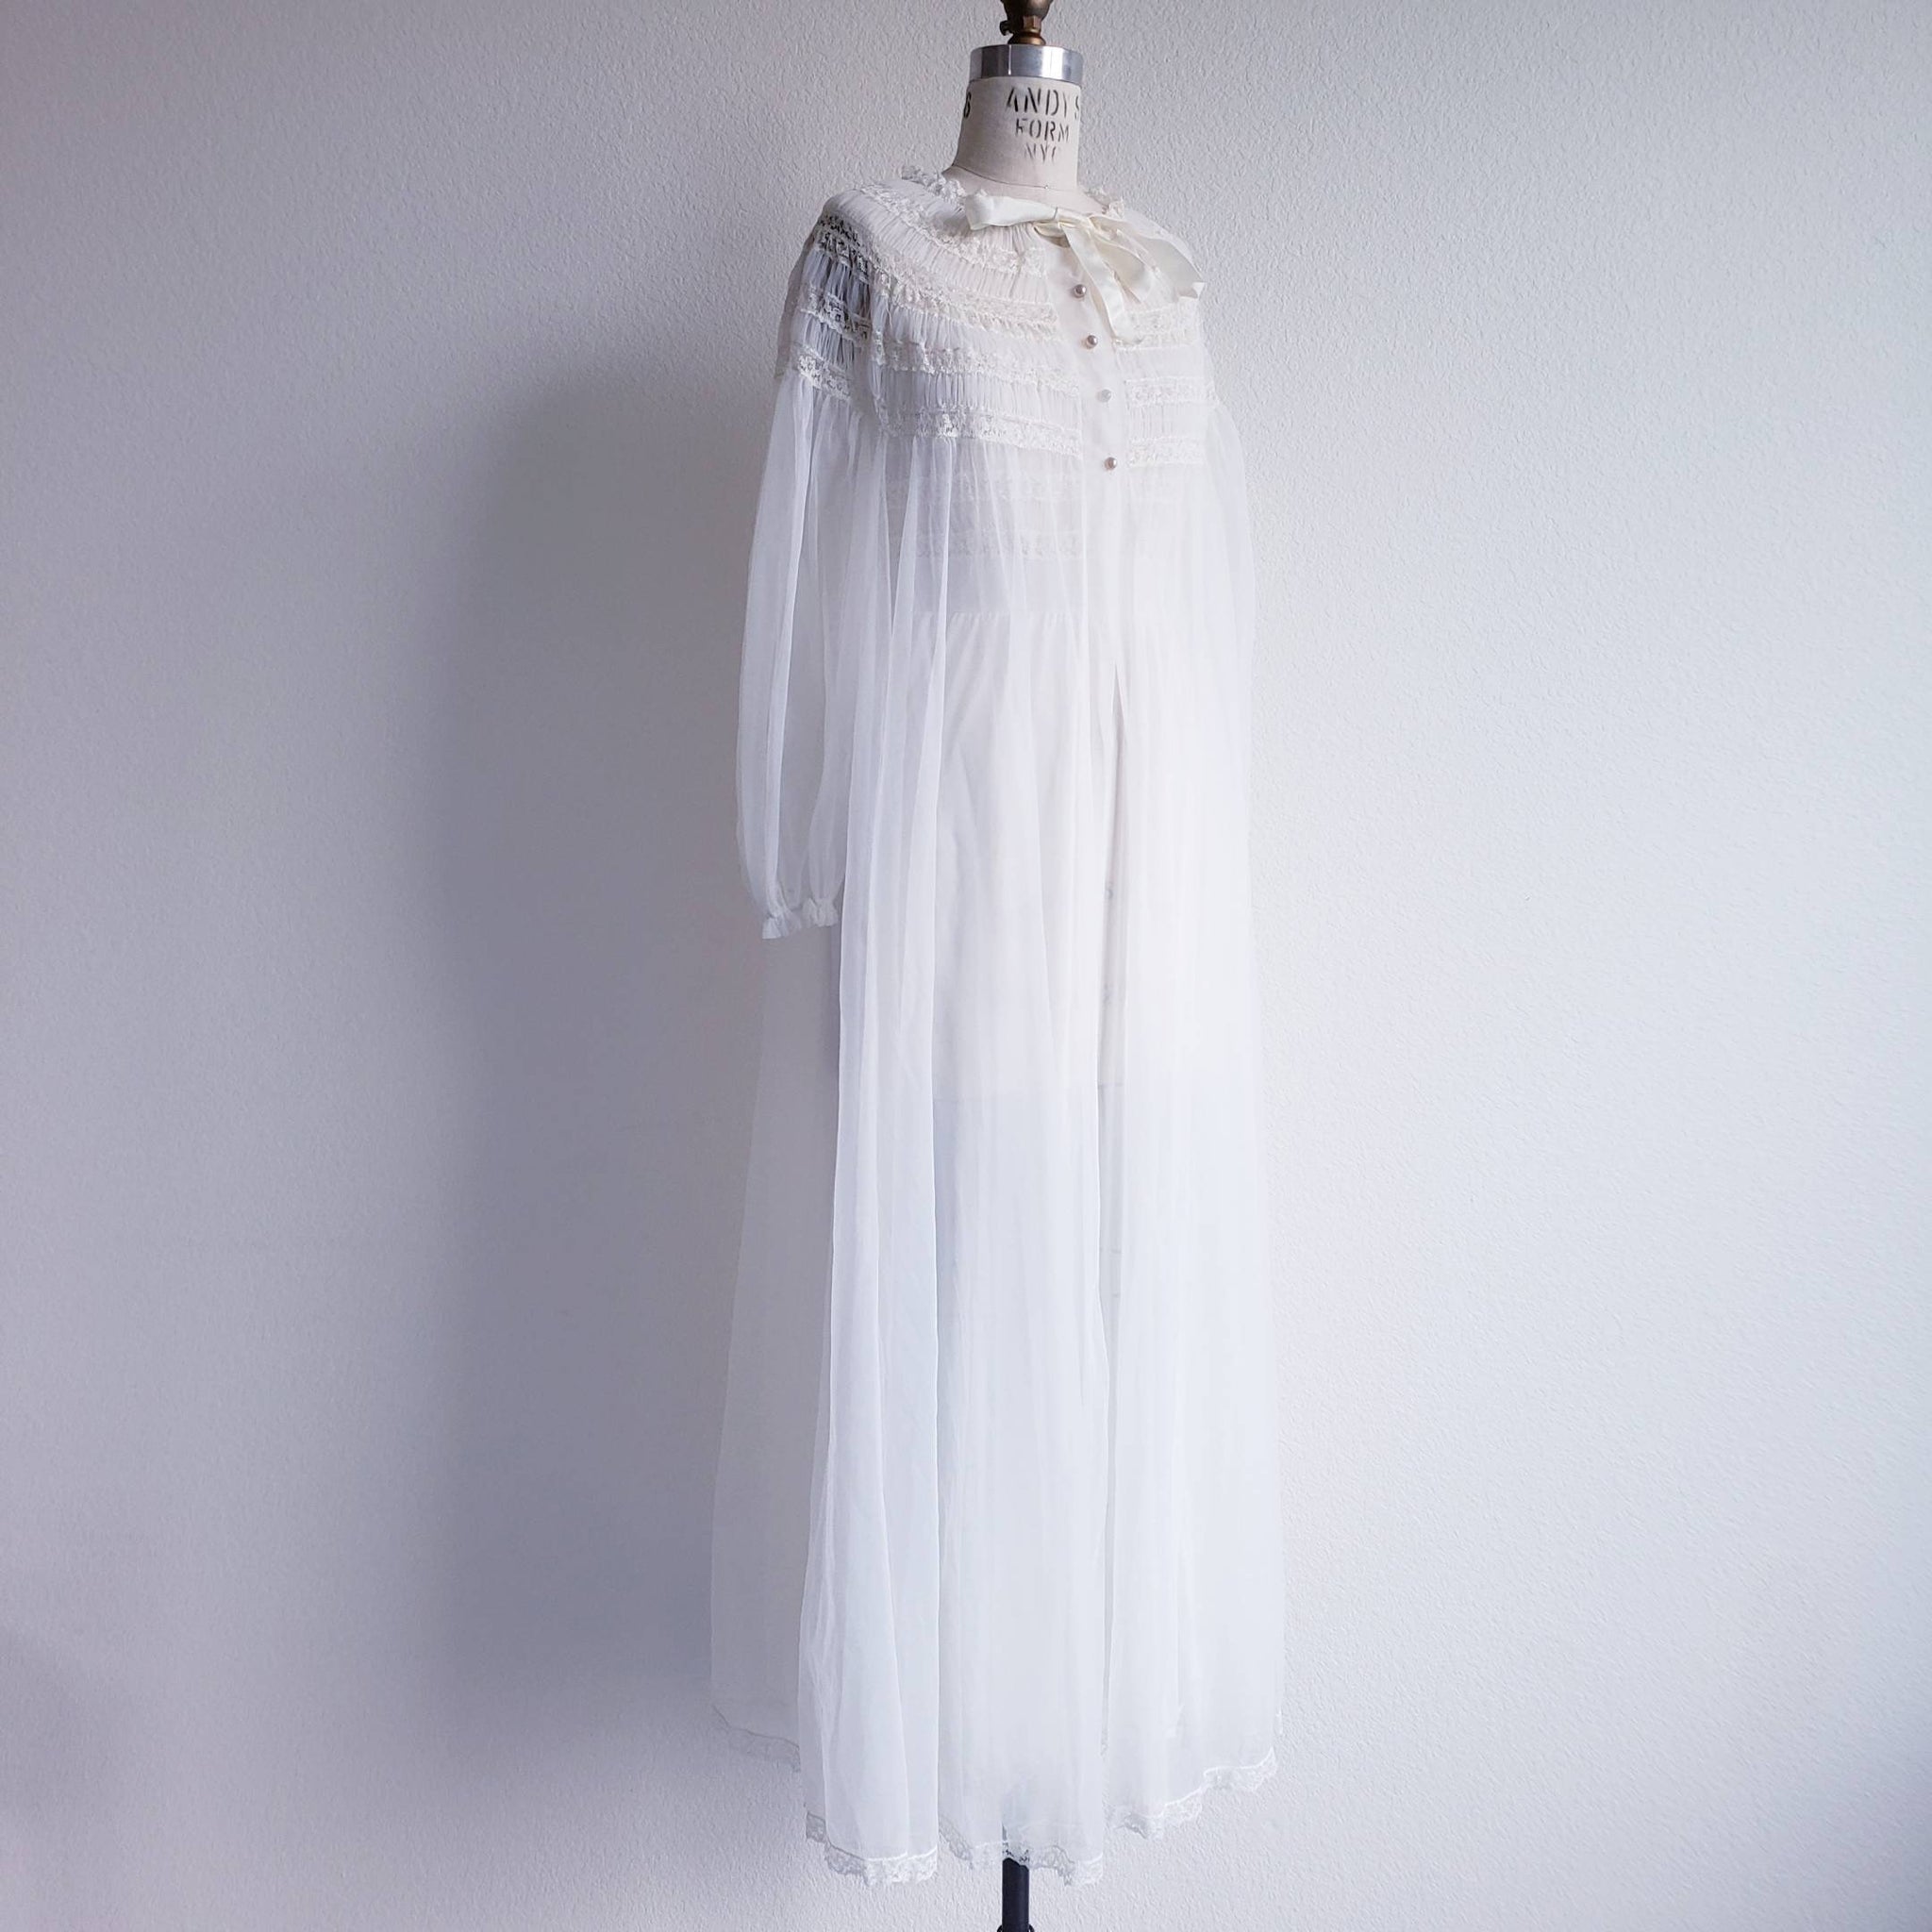 Vintage Radcliffe White Peignoir   Nightgown And Robe Set - ChicCityVintage